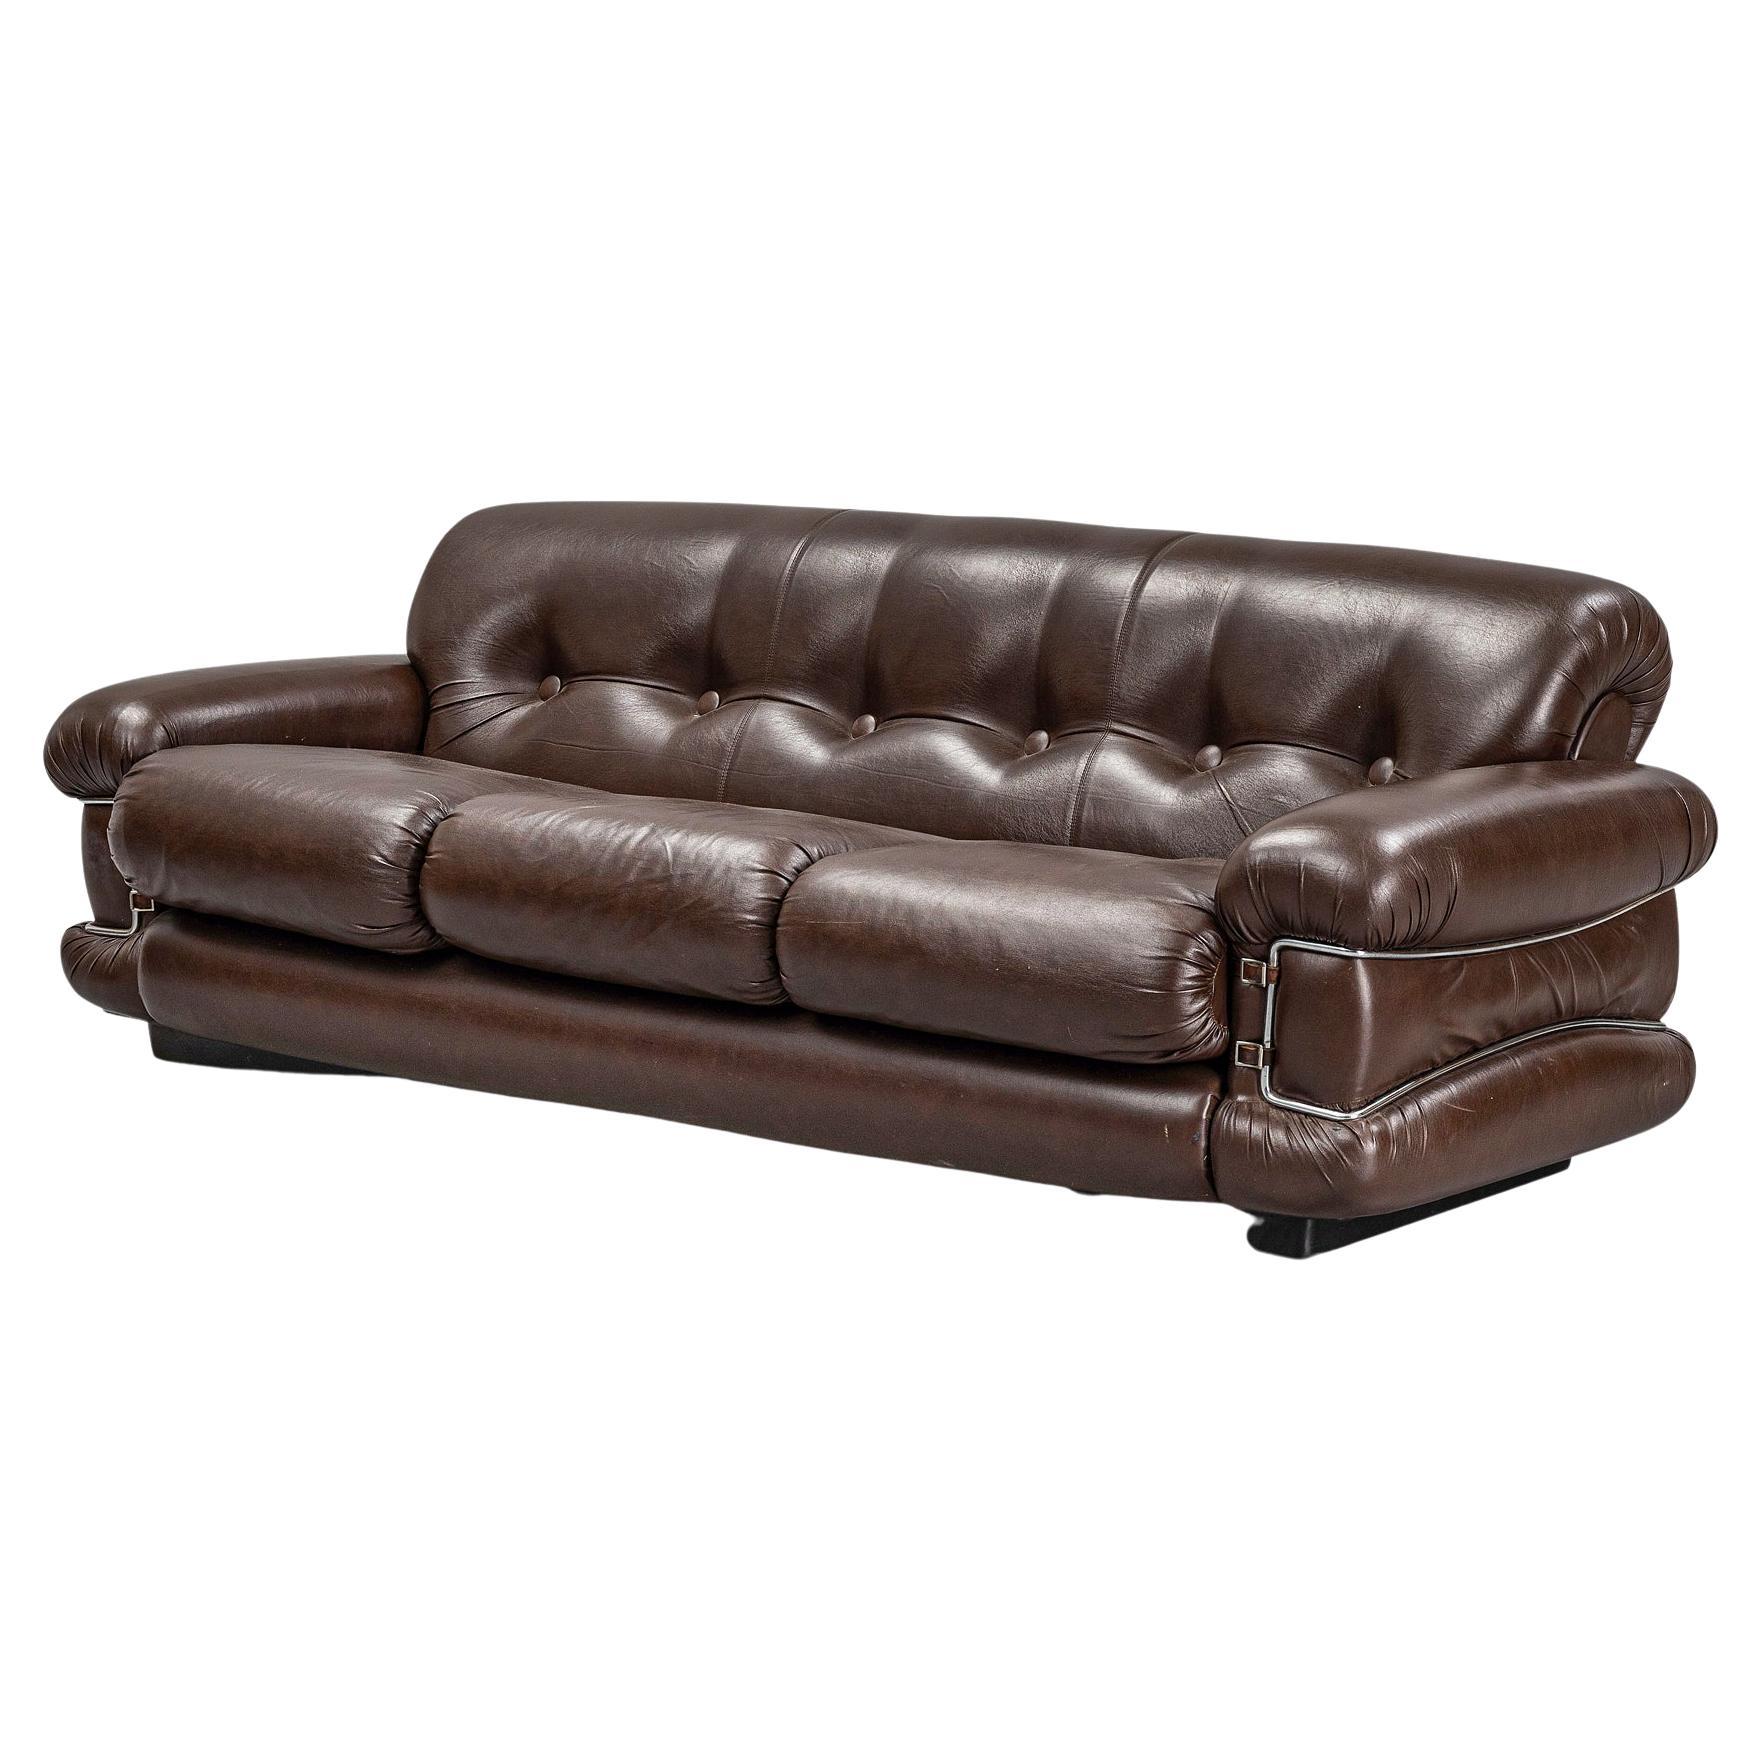 Pompon' Sofa in Brown Leather by Ceroitti For Sale